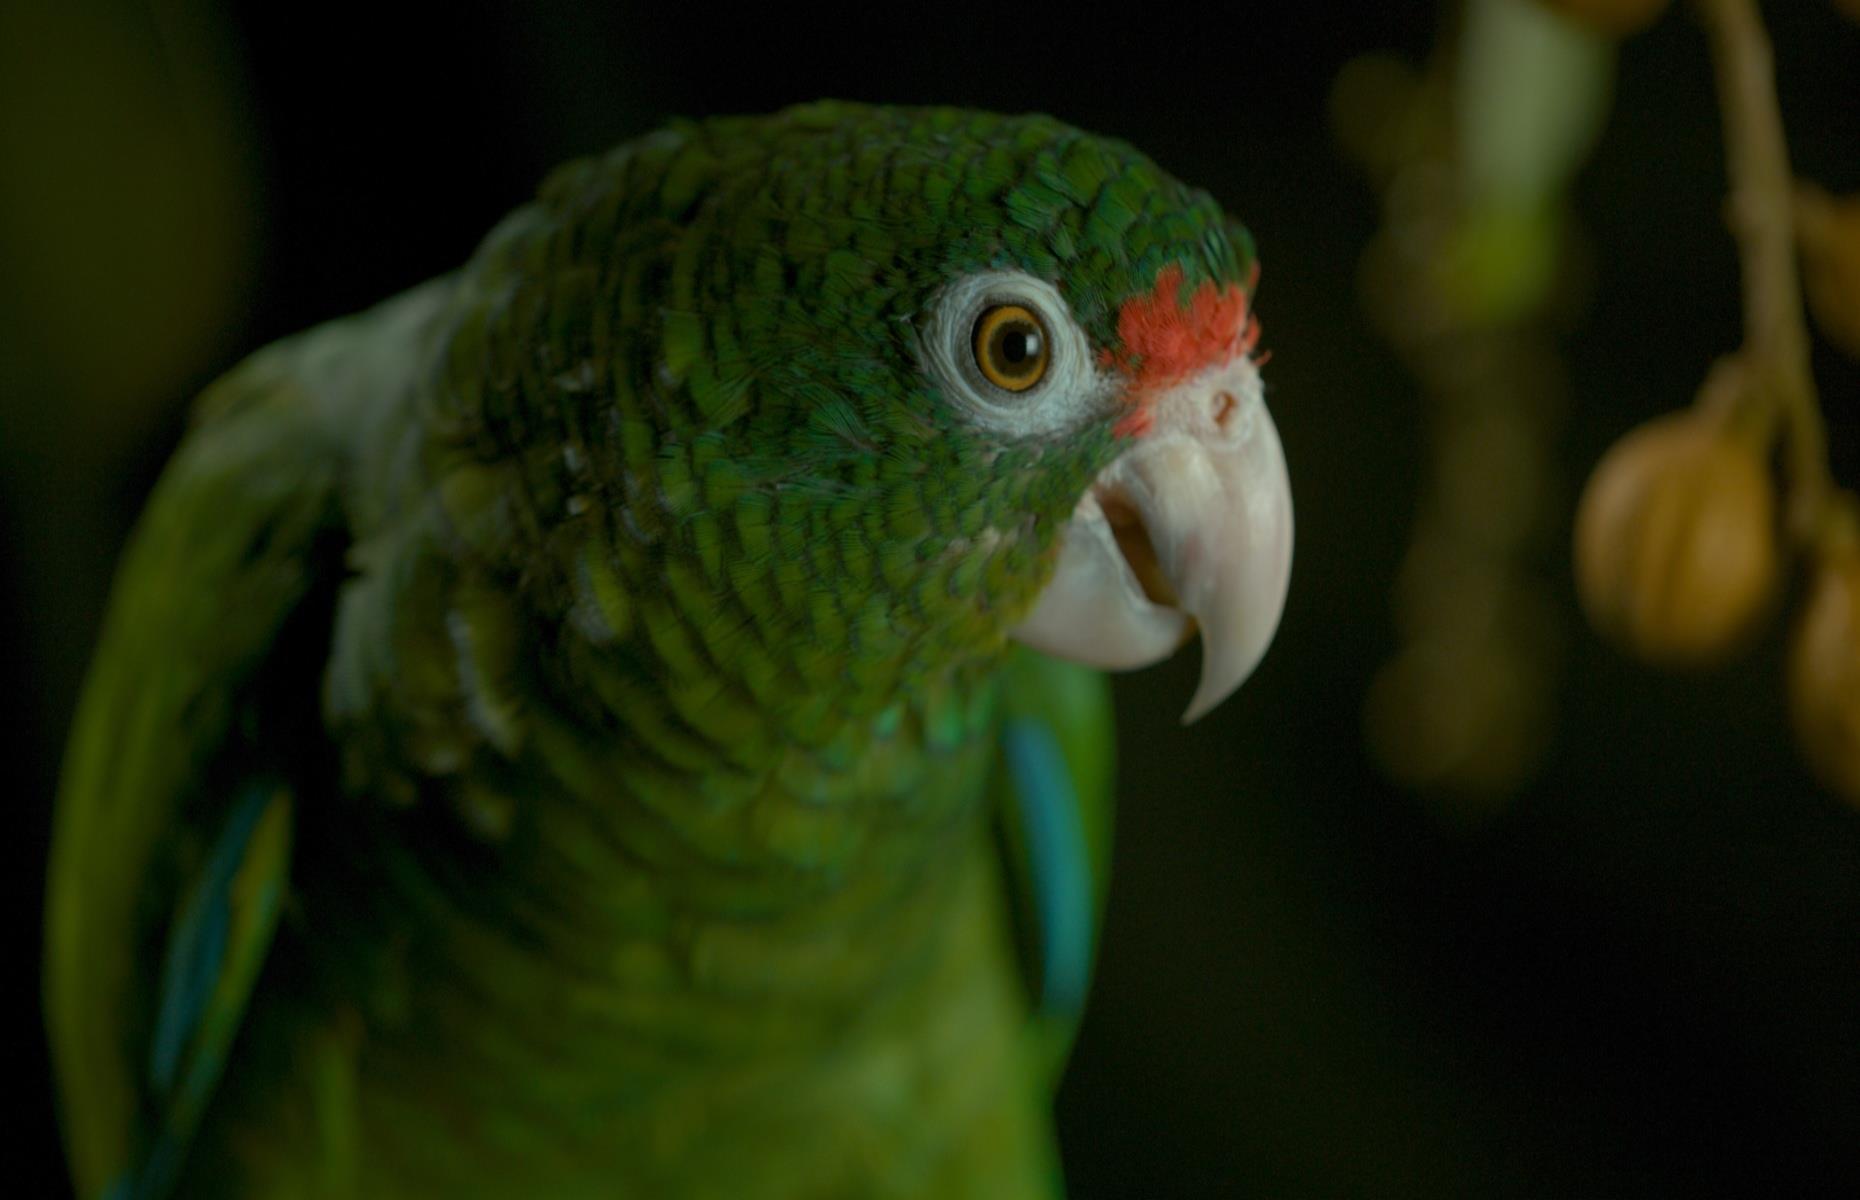 <p>It’s estimated around one million Puerto Rican parrots inhabited the archipelago at the beginning of the sixteenth century, but the arrival of Spanish colonists took its toll and by 1975, just 13 remained. The Puerto Rican Parrot Recovery Plan has helped bring them back from the brink, and despite the devastation caused by Hurricanes Maria and Irma in 2017, there are now an estimated 250 of these endangered endemic parrots in the forests of Maricao, El Yunque, and Río Abajo.</p>